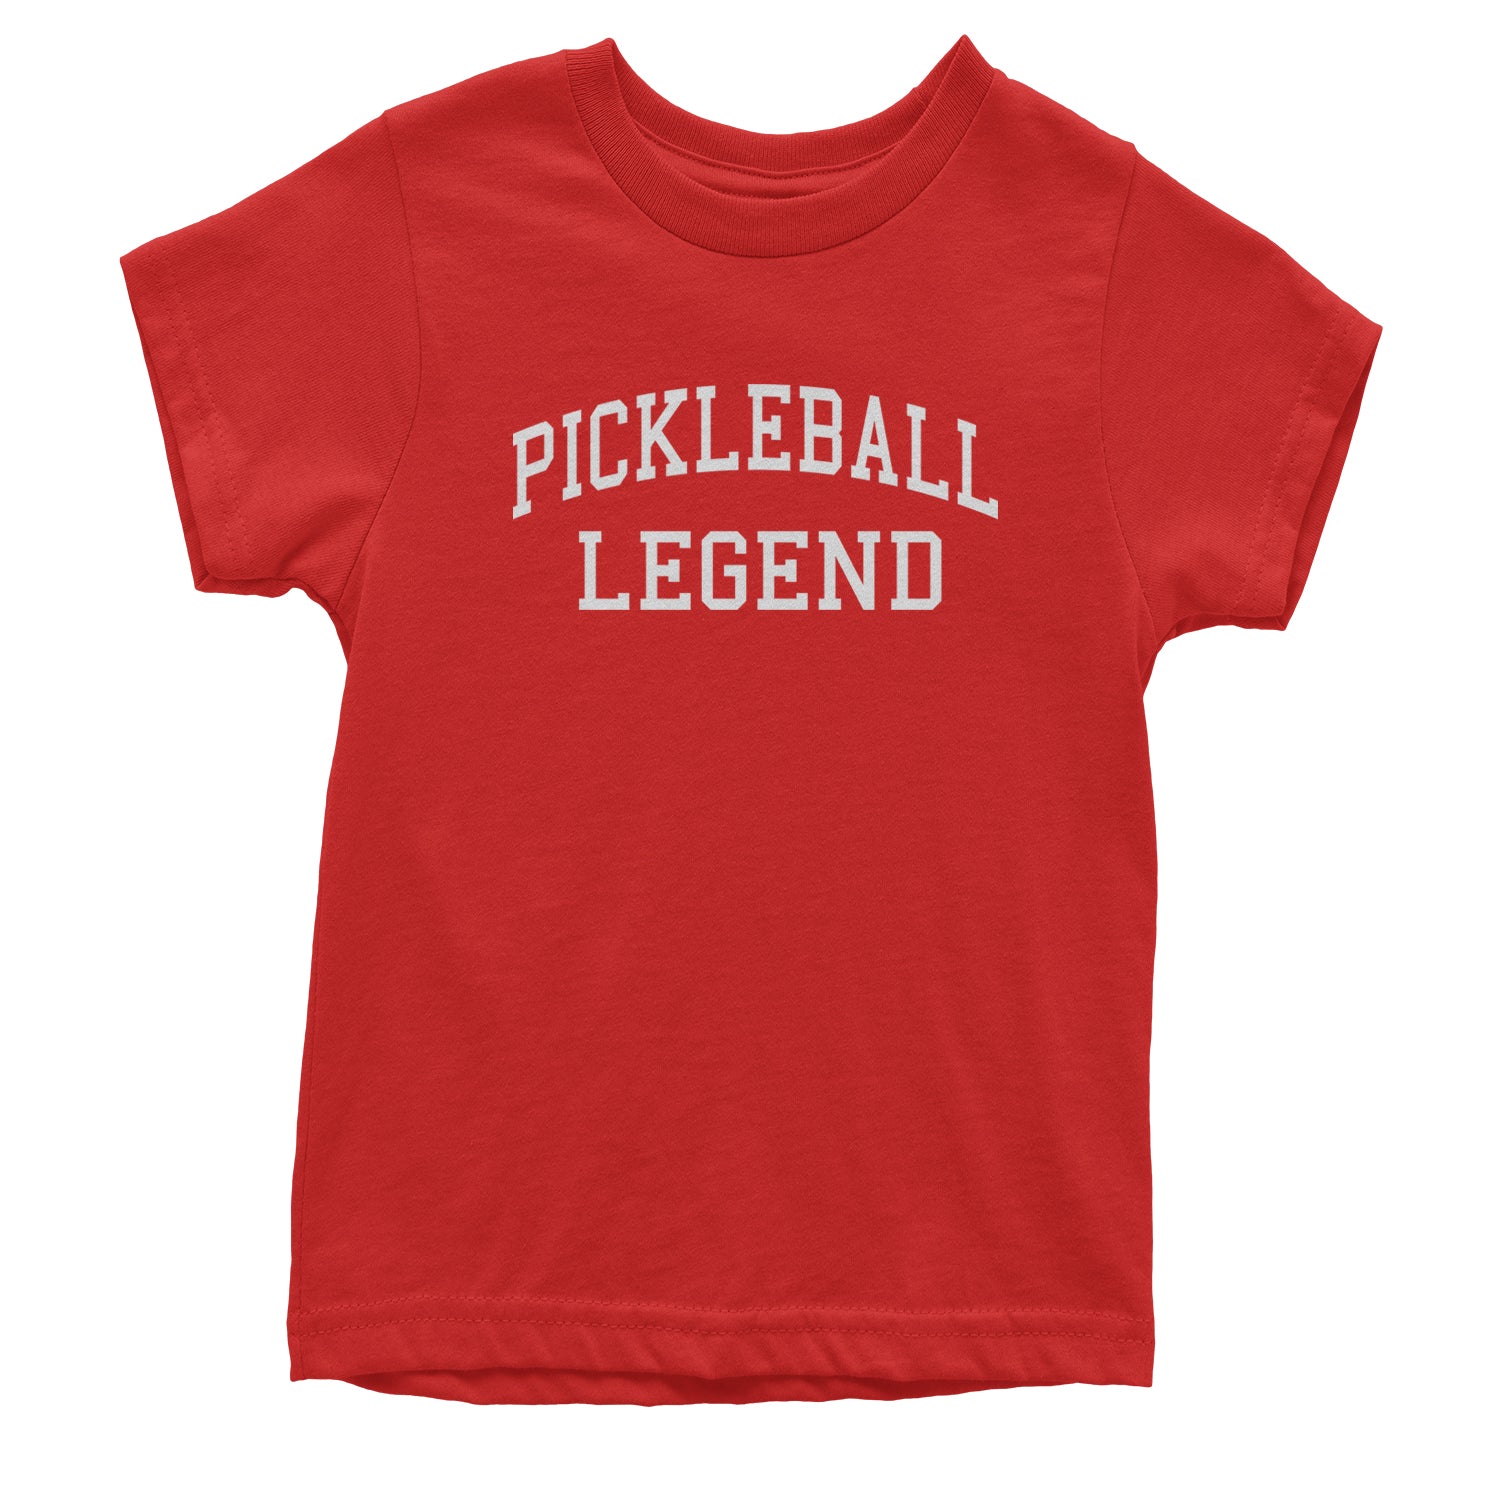 Pickleball Legend Youth T-shirt ball, dink, dinking, pickle, pickleball by Expression Tees